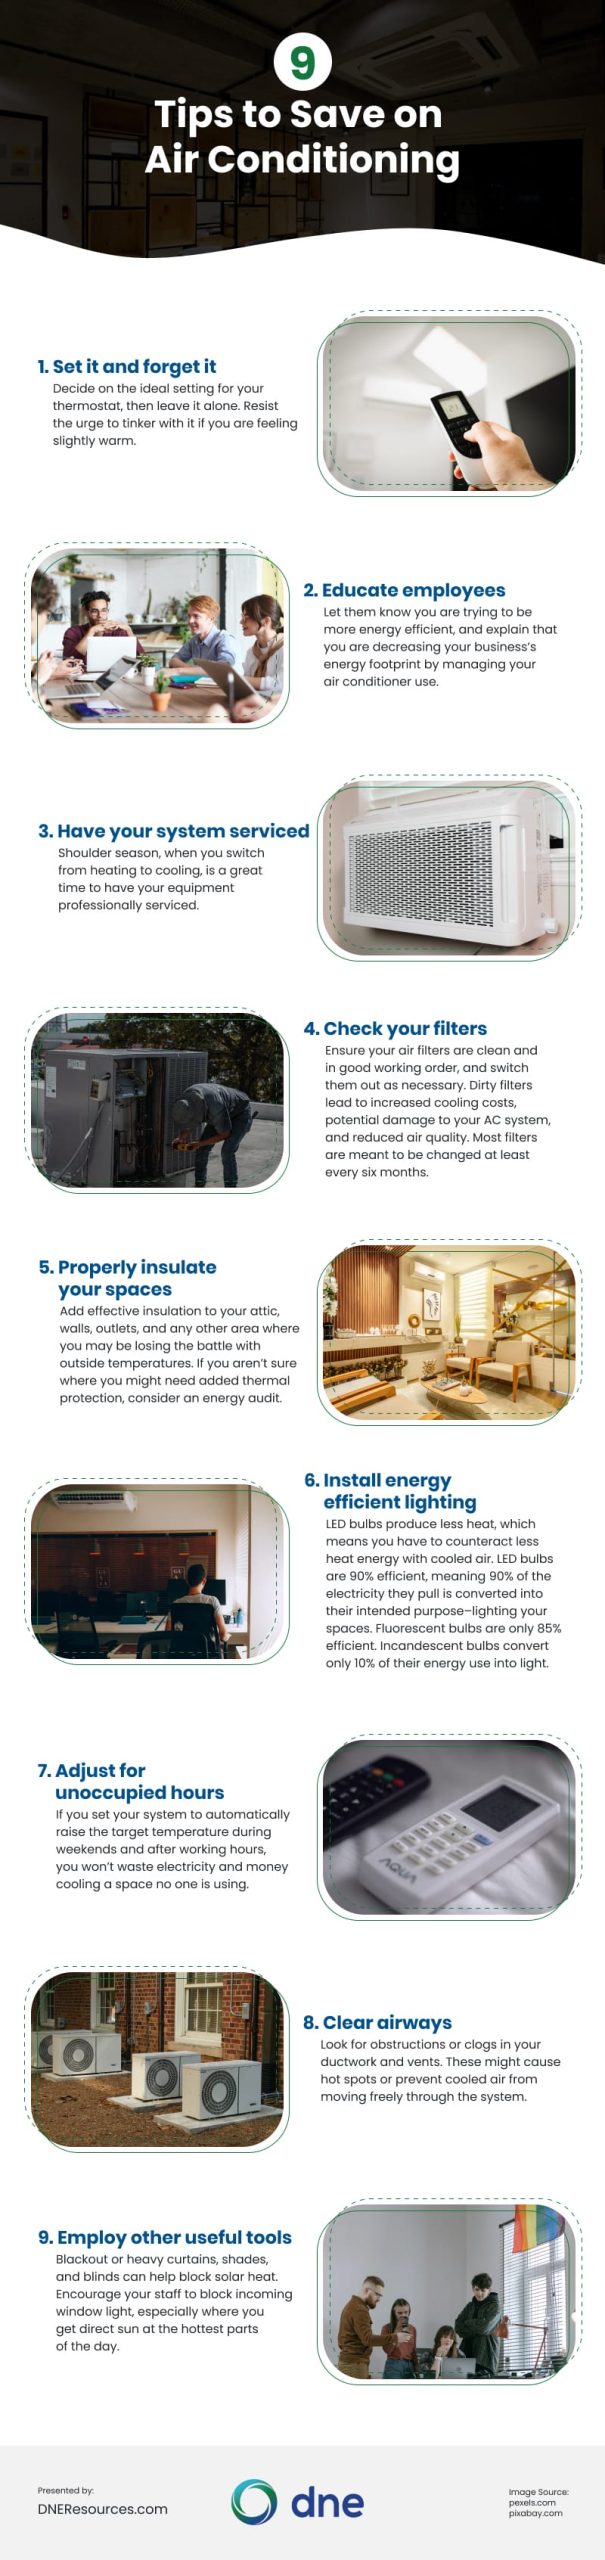 9 Tips to Save on Air Conditioning Infographic